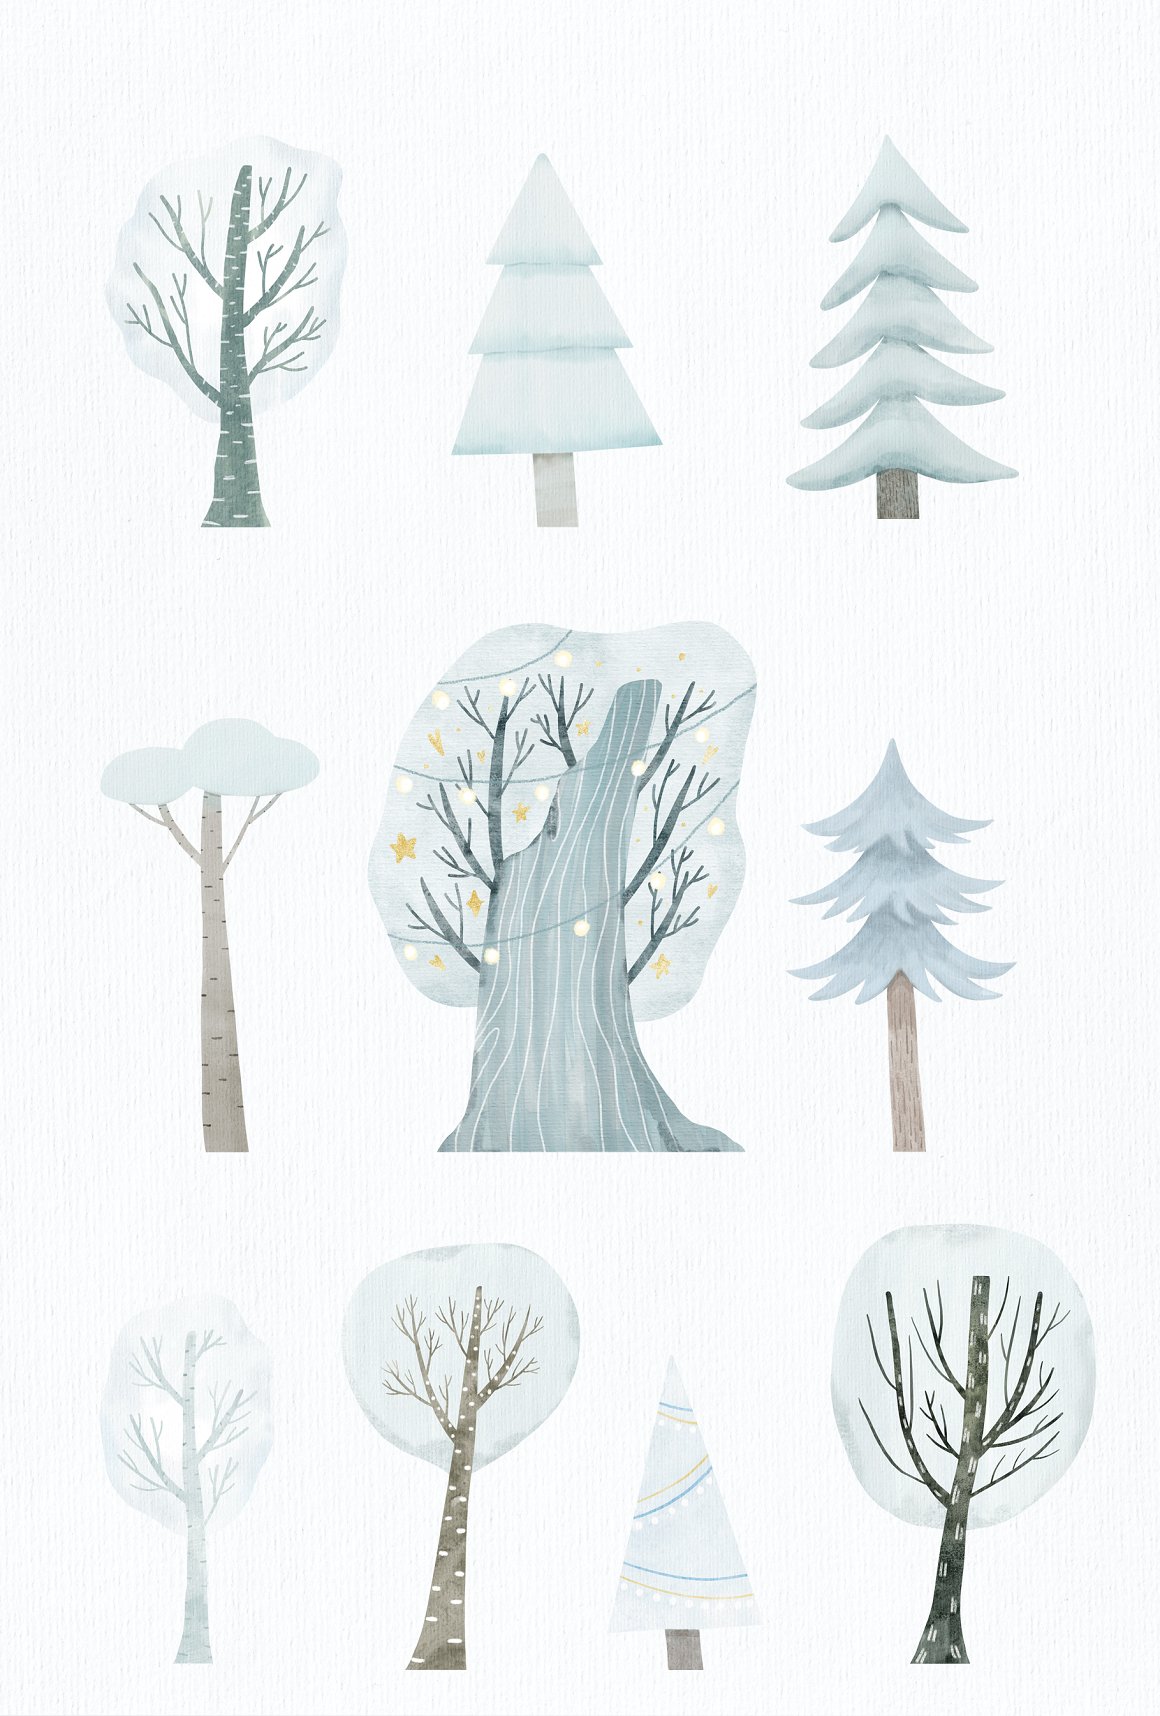 Clipart of 10 different watercolor illustrations of christmas tree.